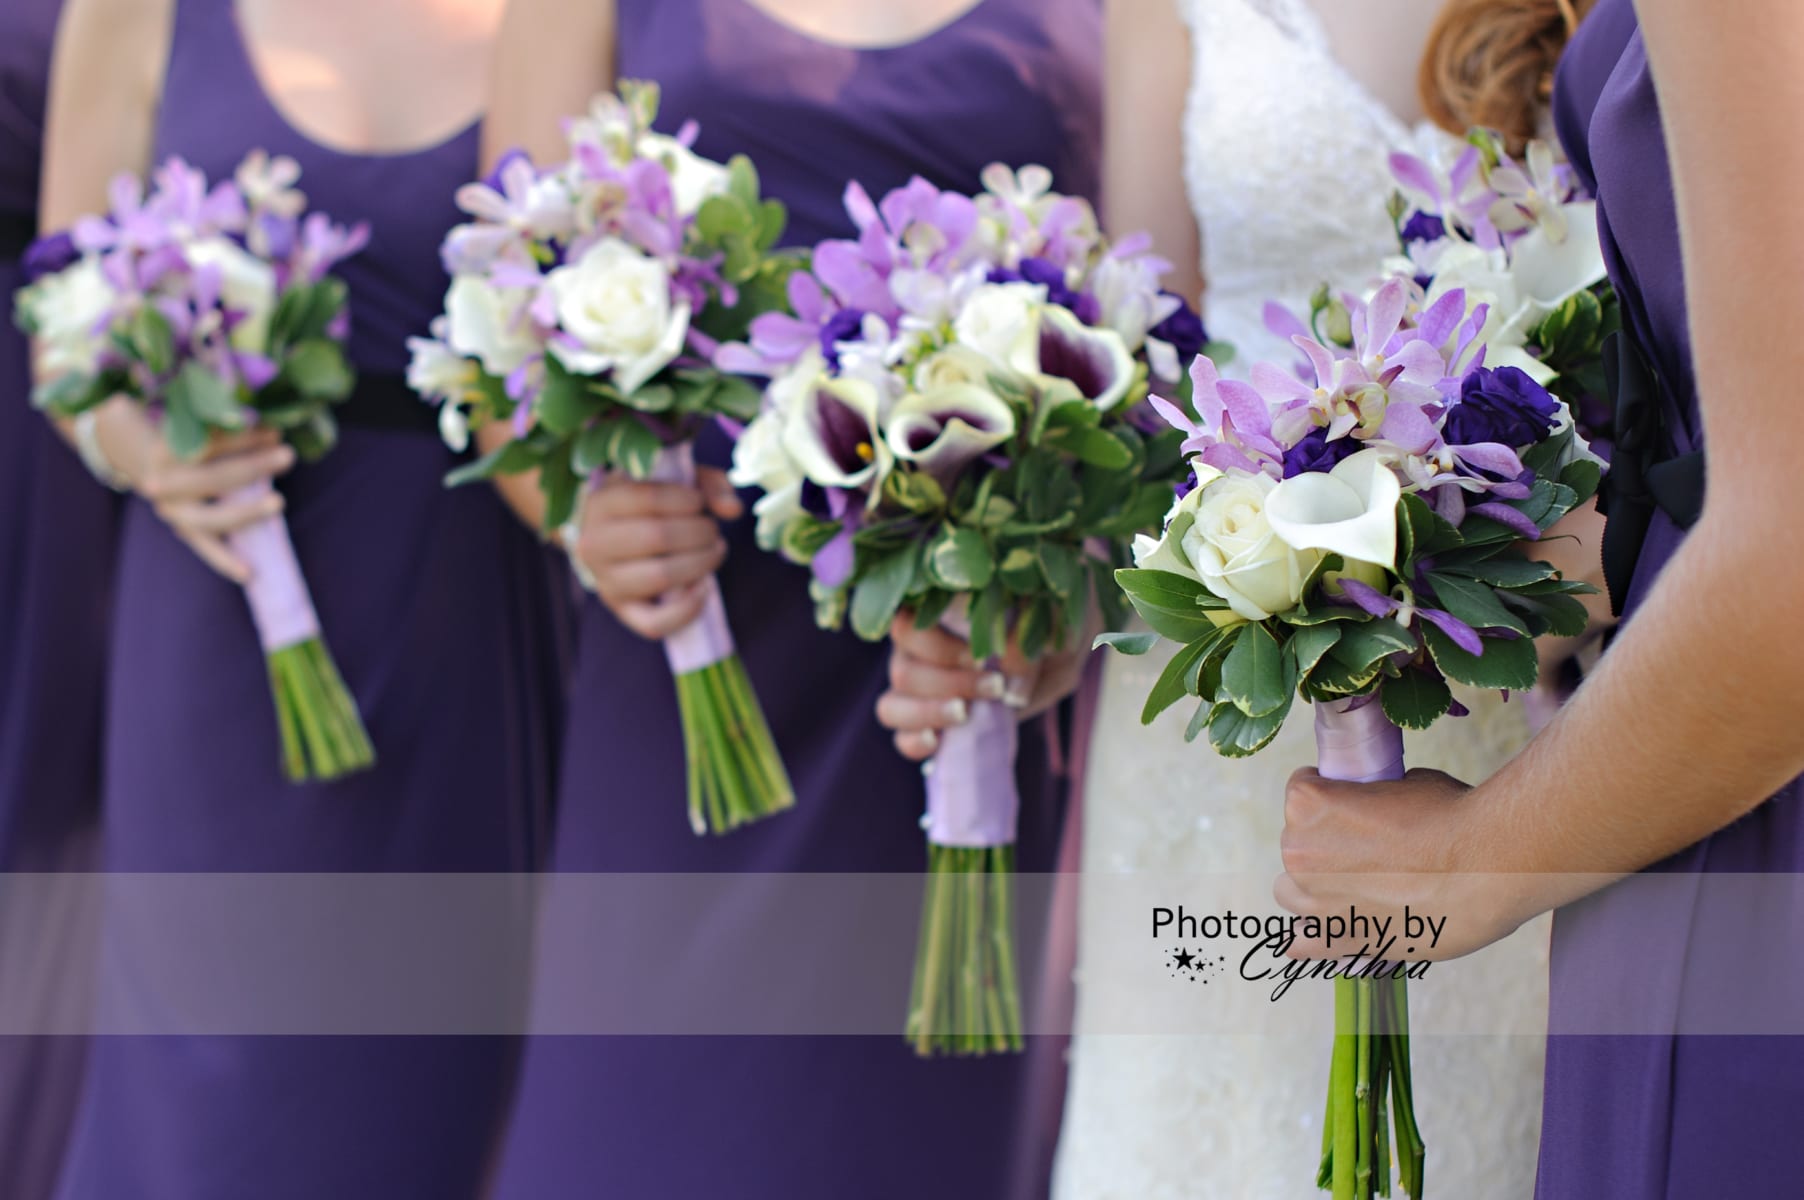 Bride and bridesmaids with bouquets.